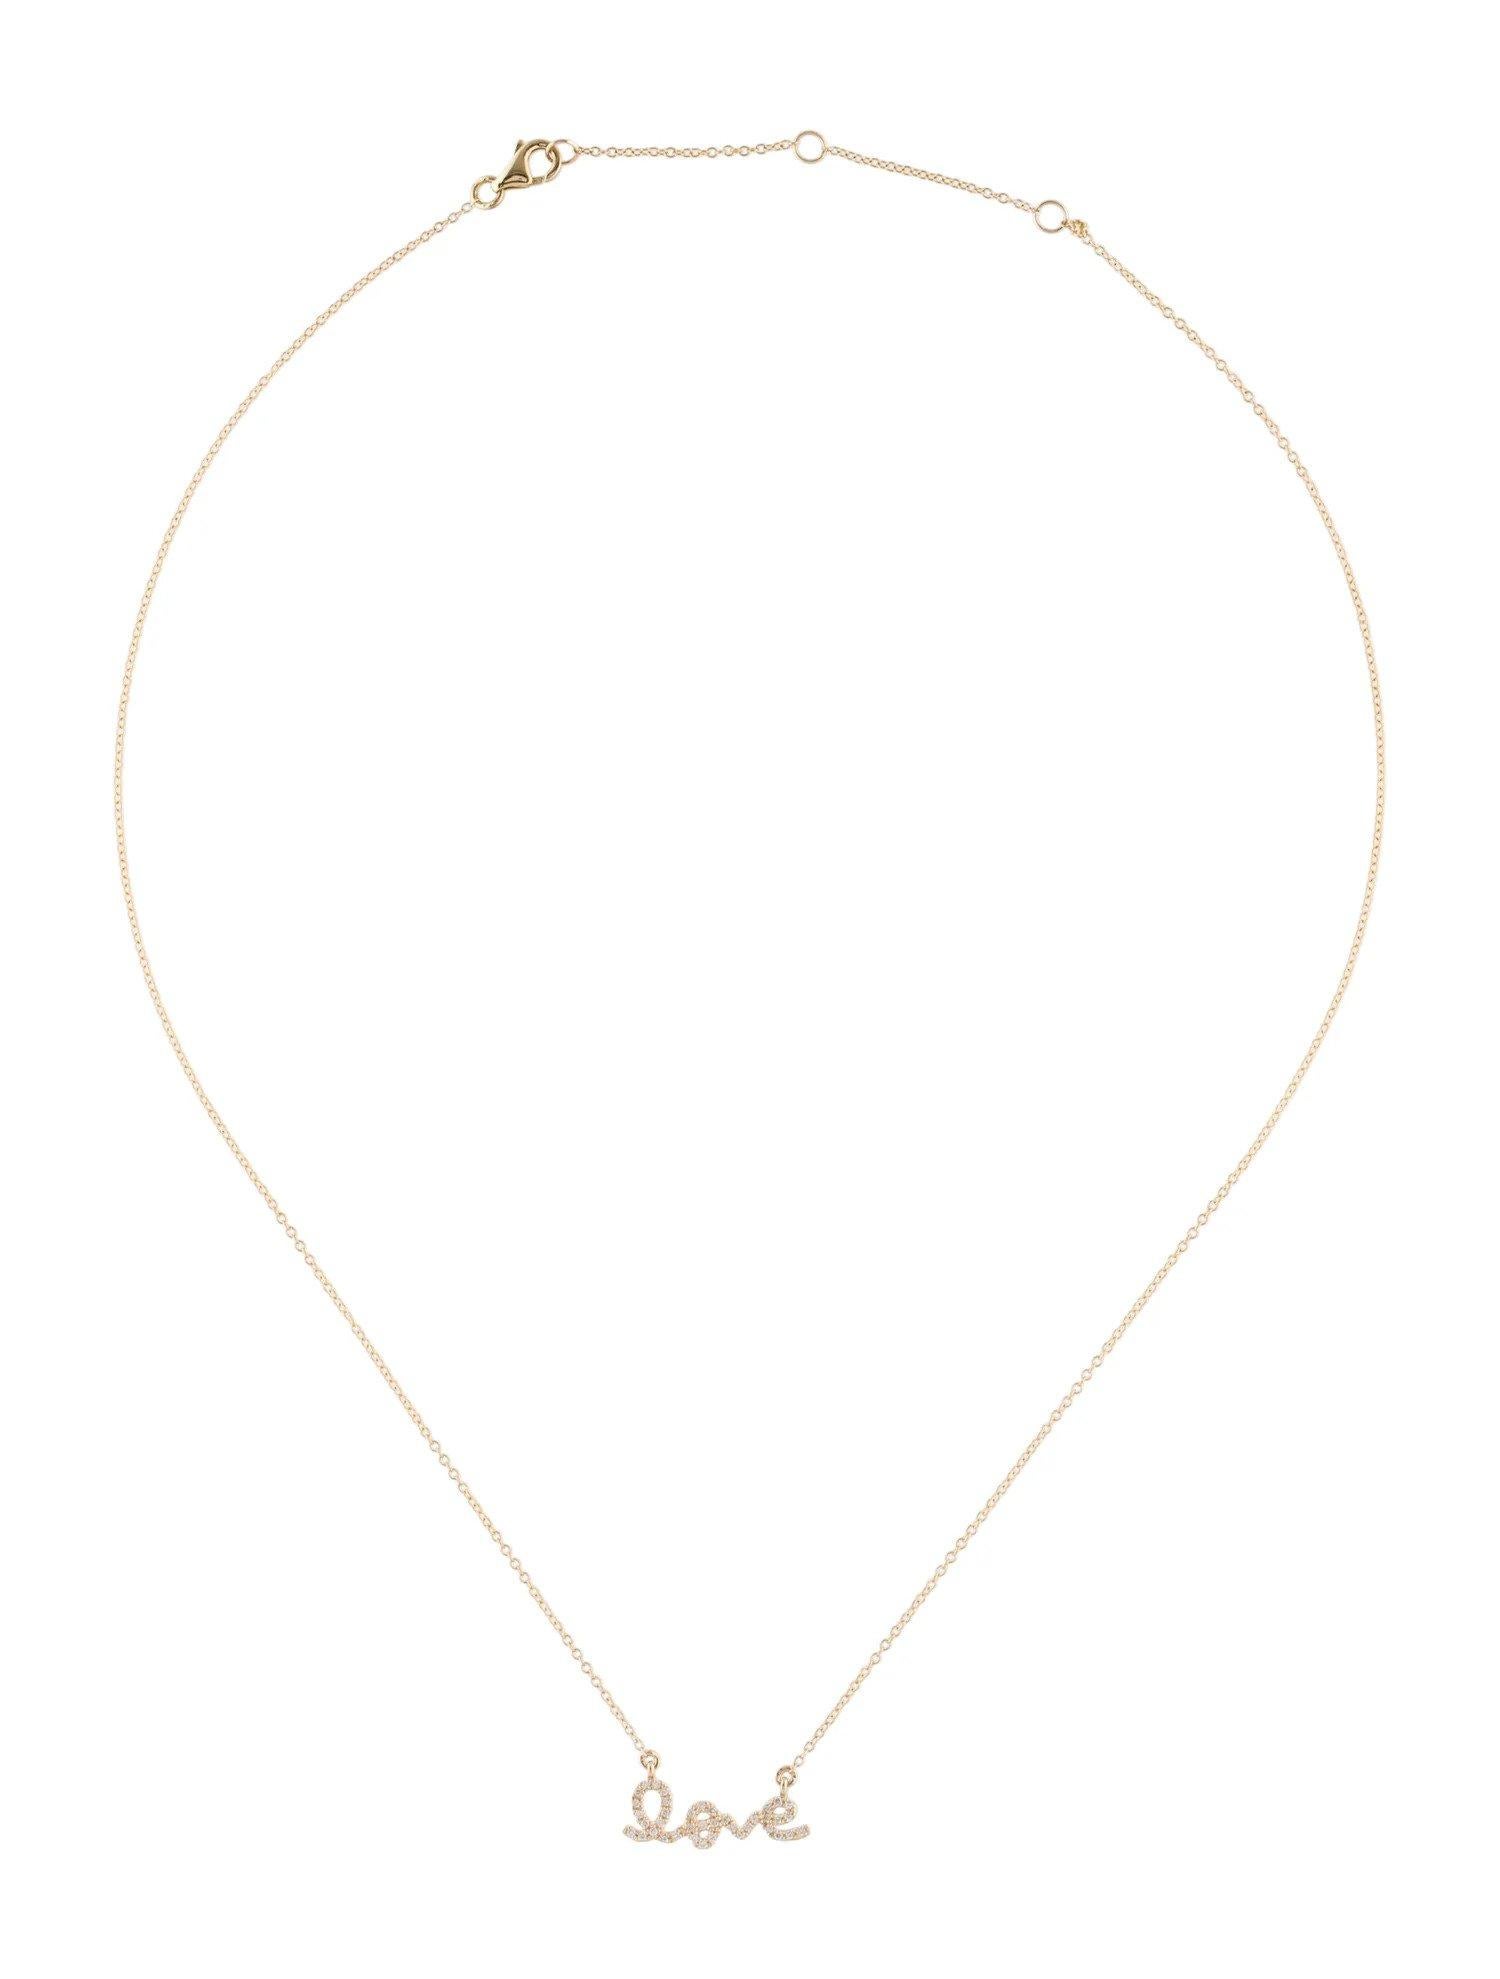 0.13 Carat Diamond Love Yellow Gold Pendant Necklace In New Condition For Sale In Great Neck, NY